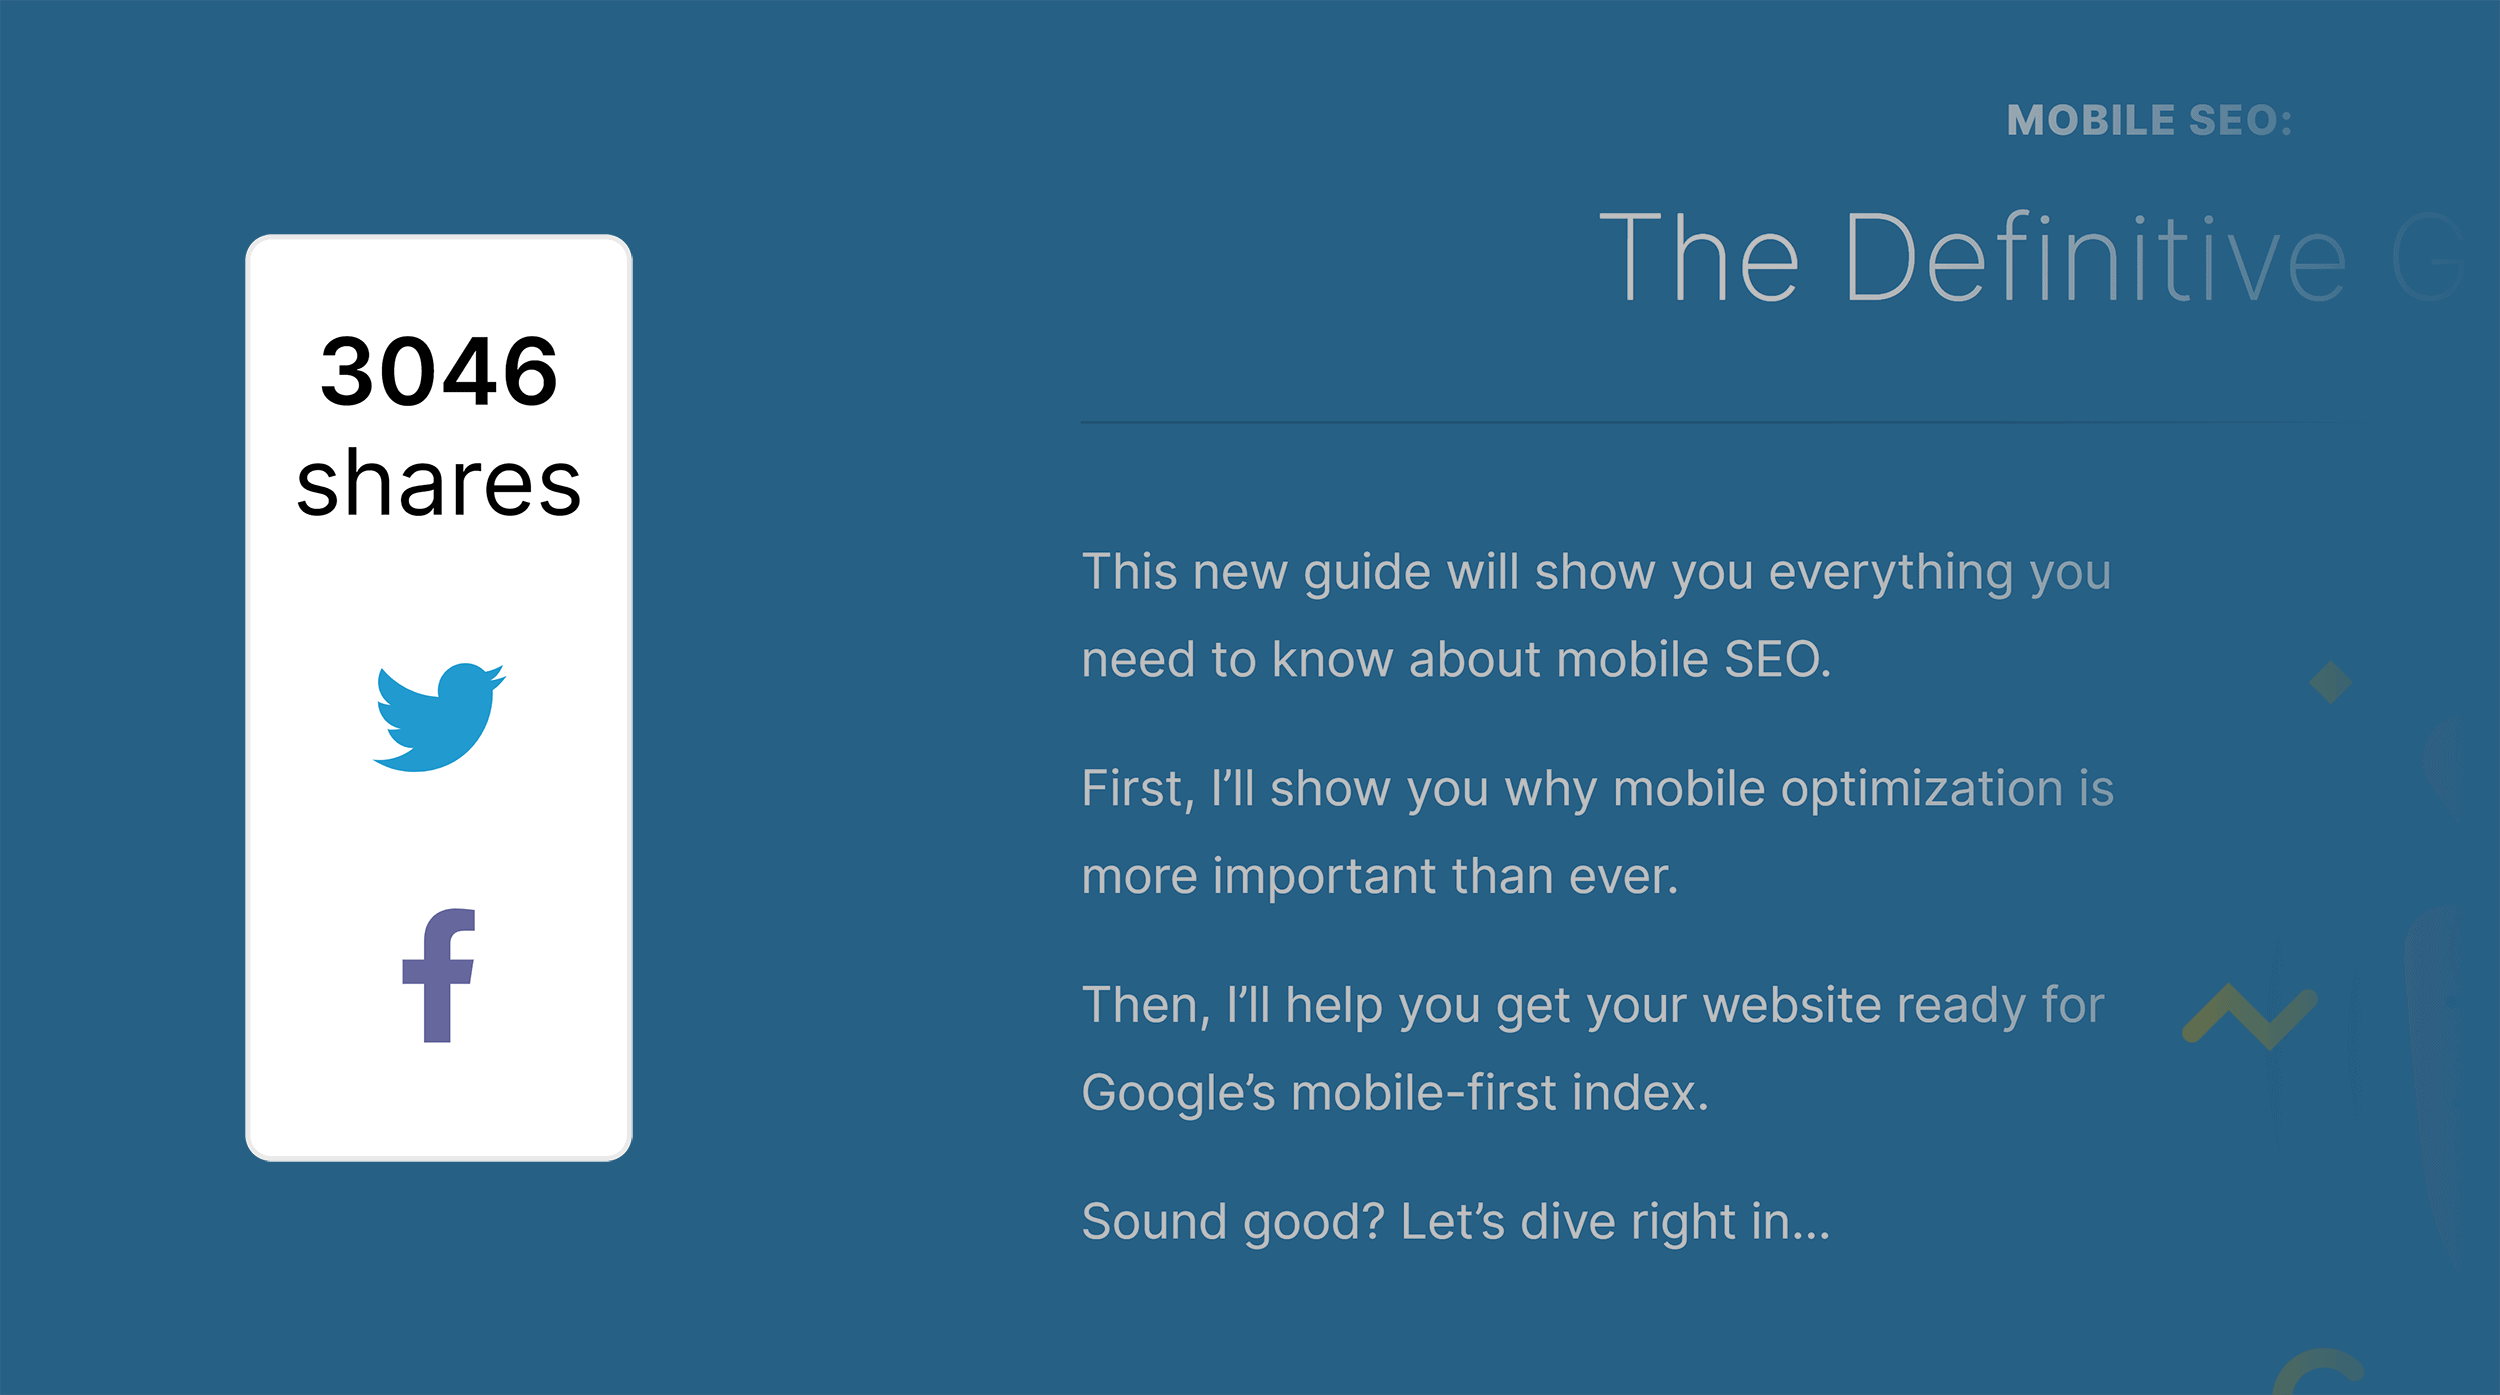 mobile-seo-guide-shares